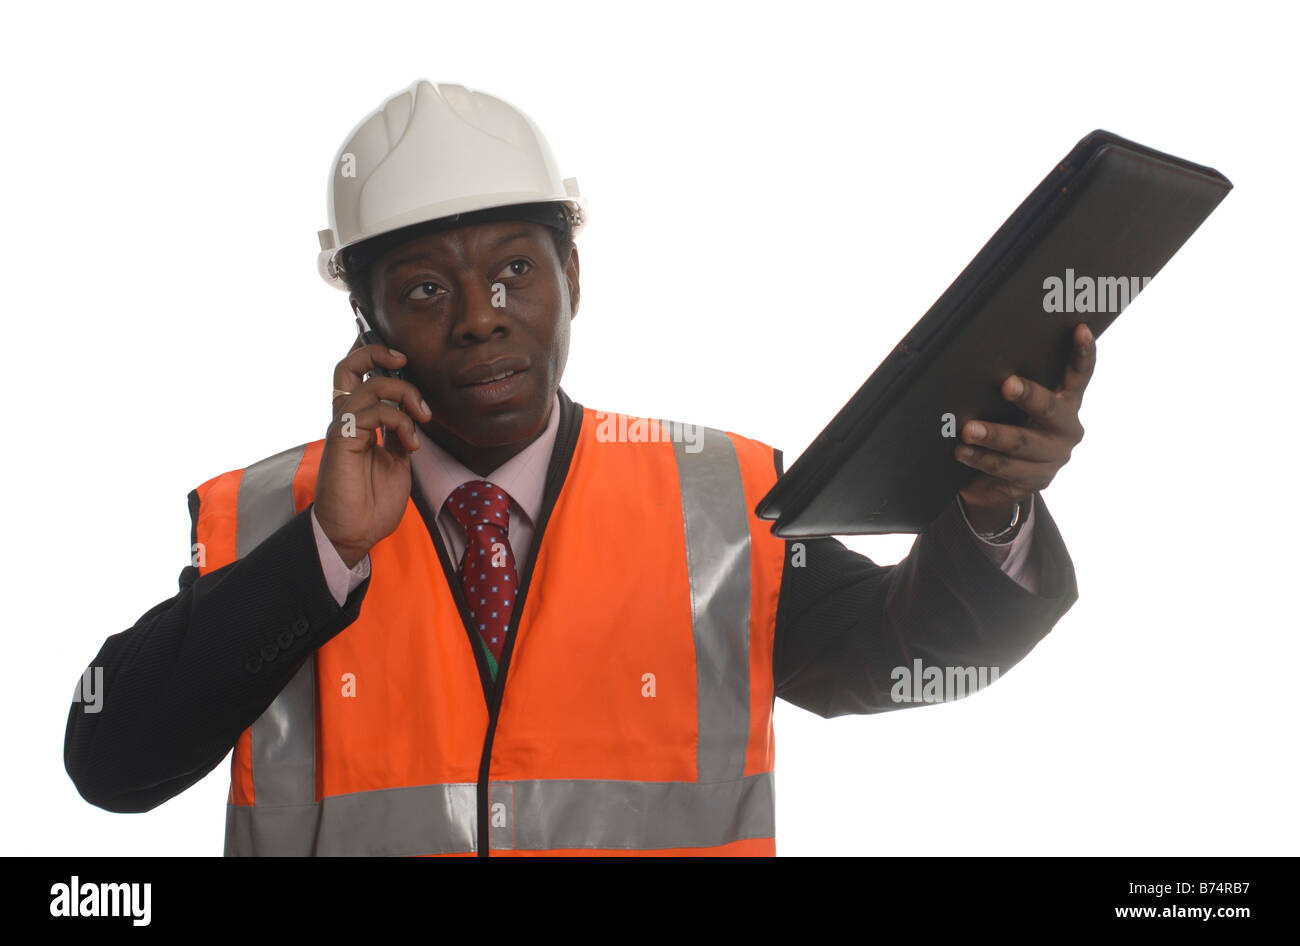 Cut out of a man overseeing building work in a hard hat and hi-viz vest Stock Photo